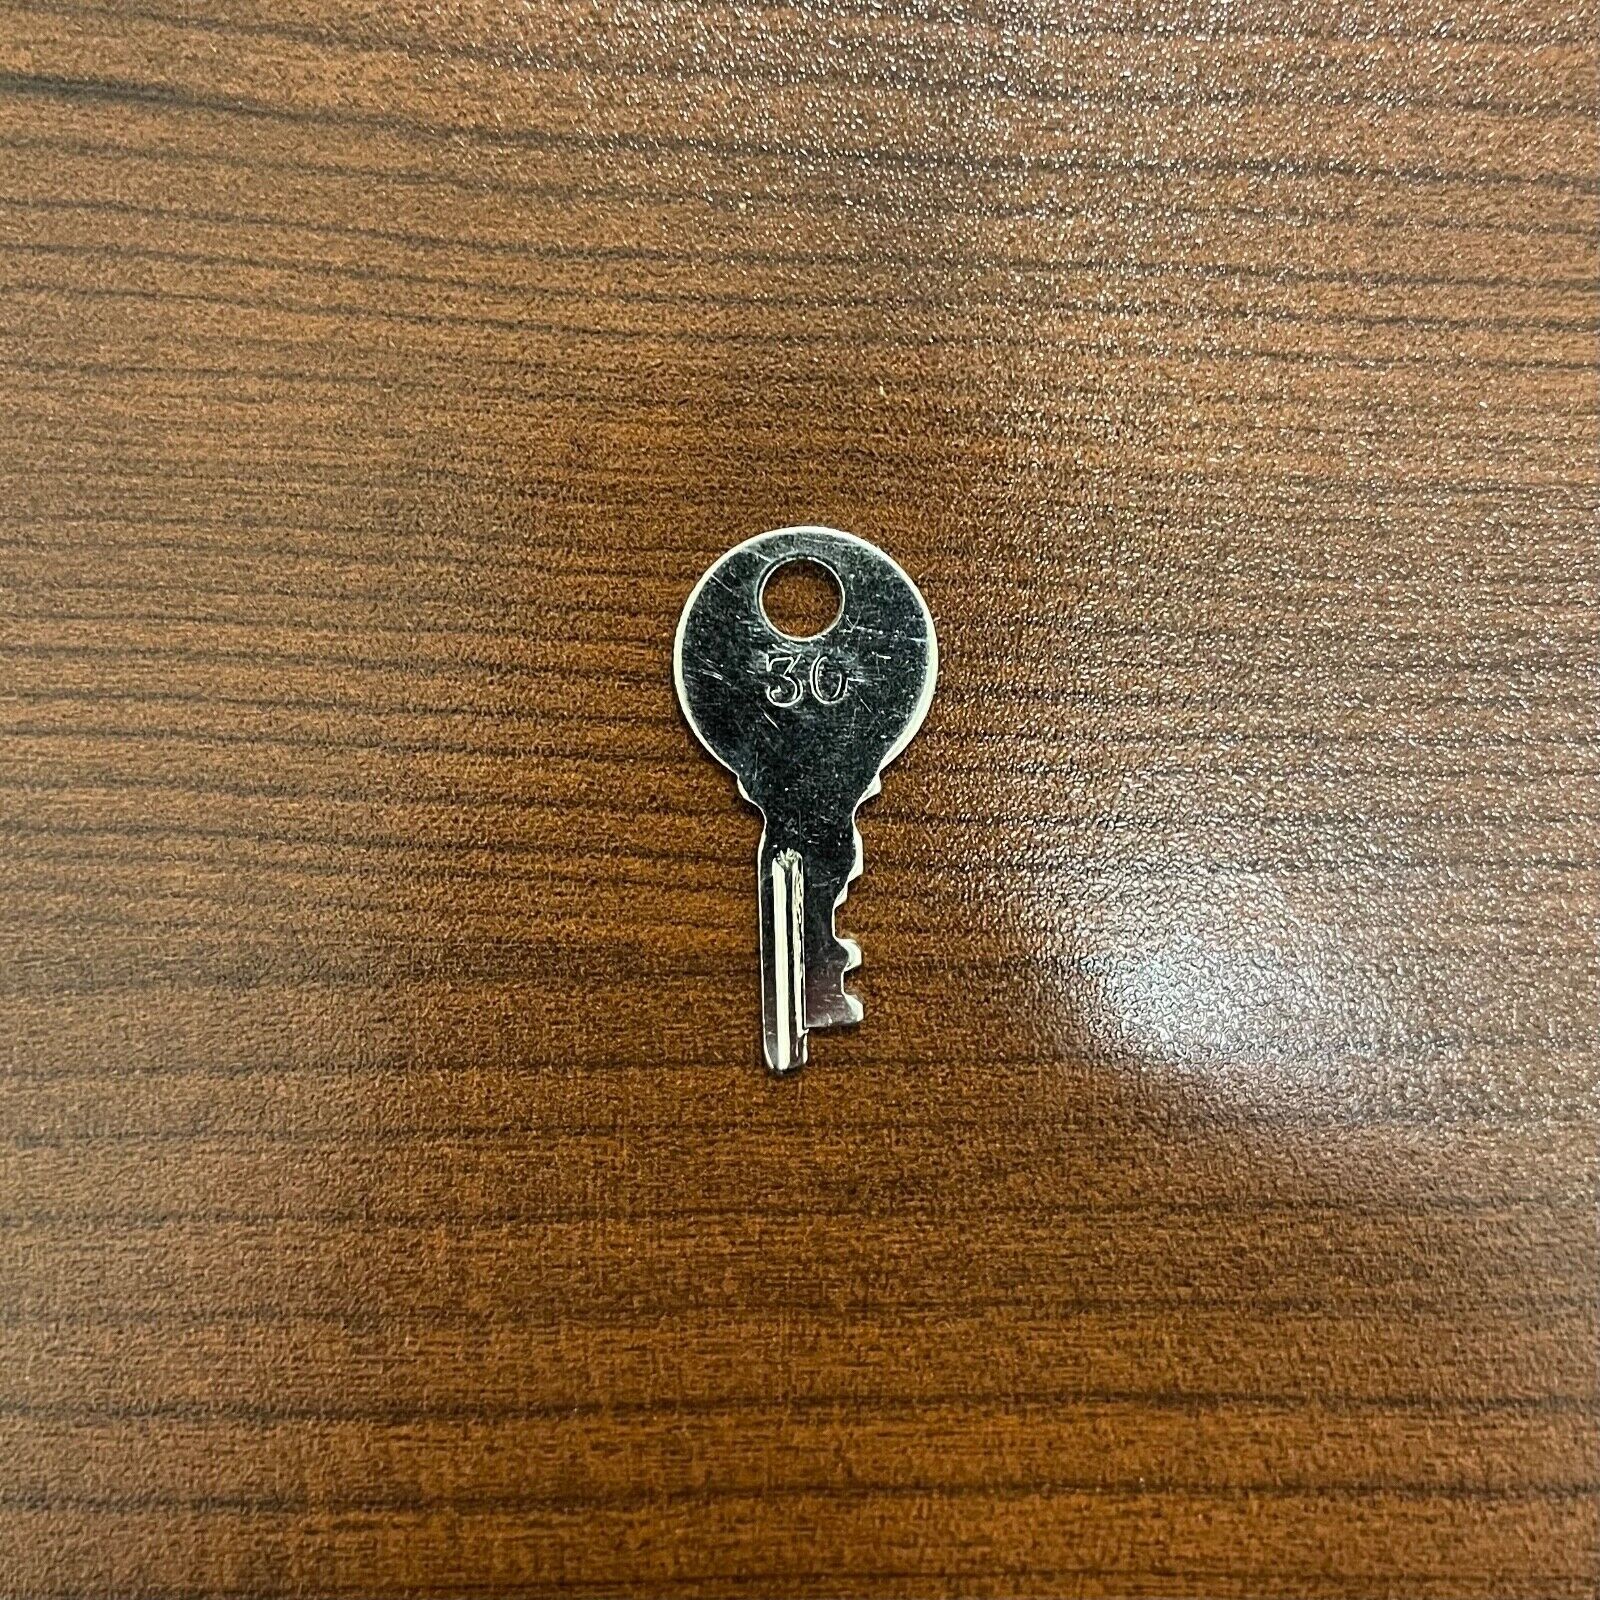 Cheney case key #30 for guitar/bass/etc. cases, as used by G&G, Fender, etc.